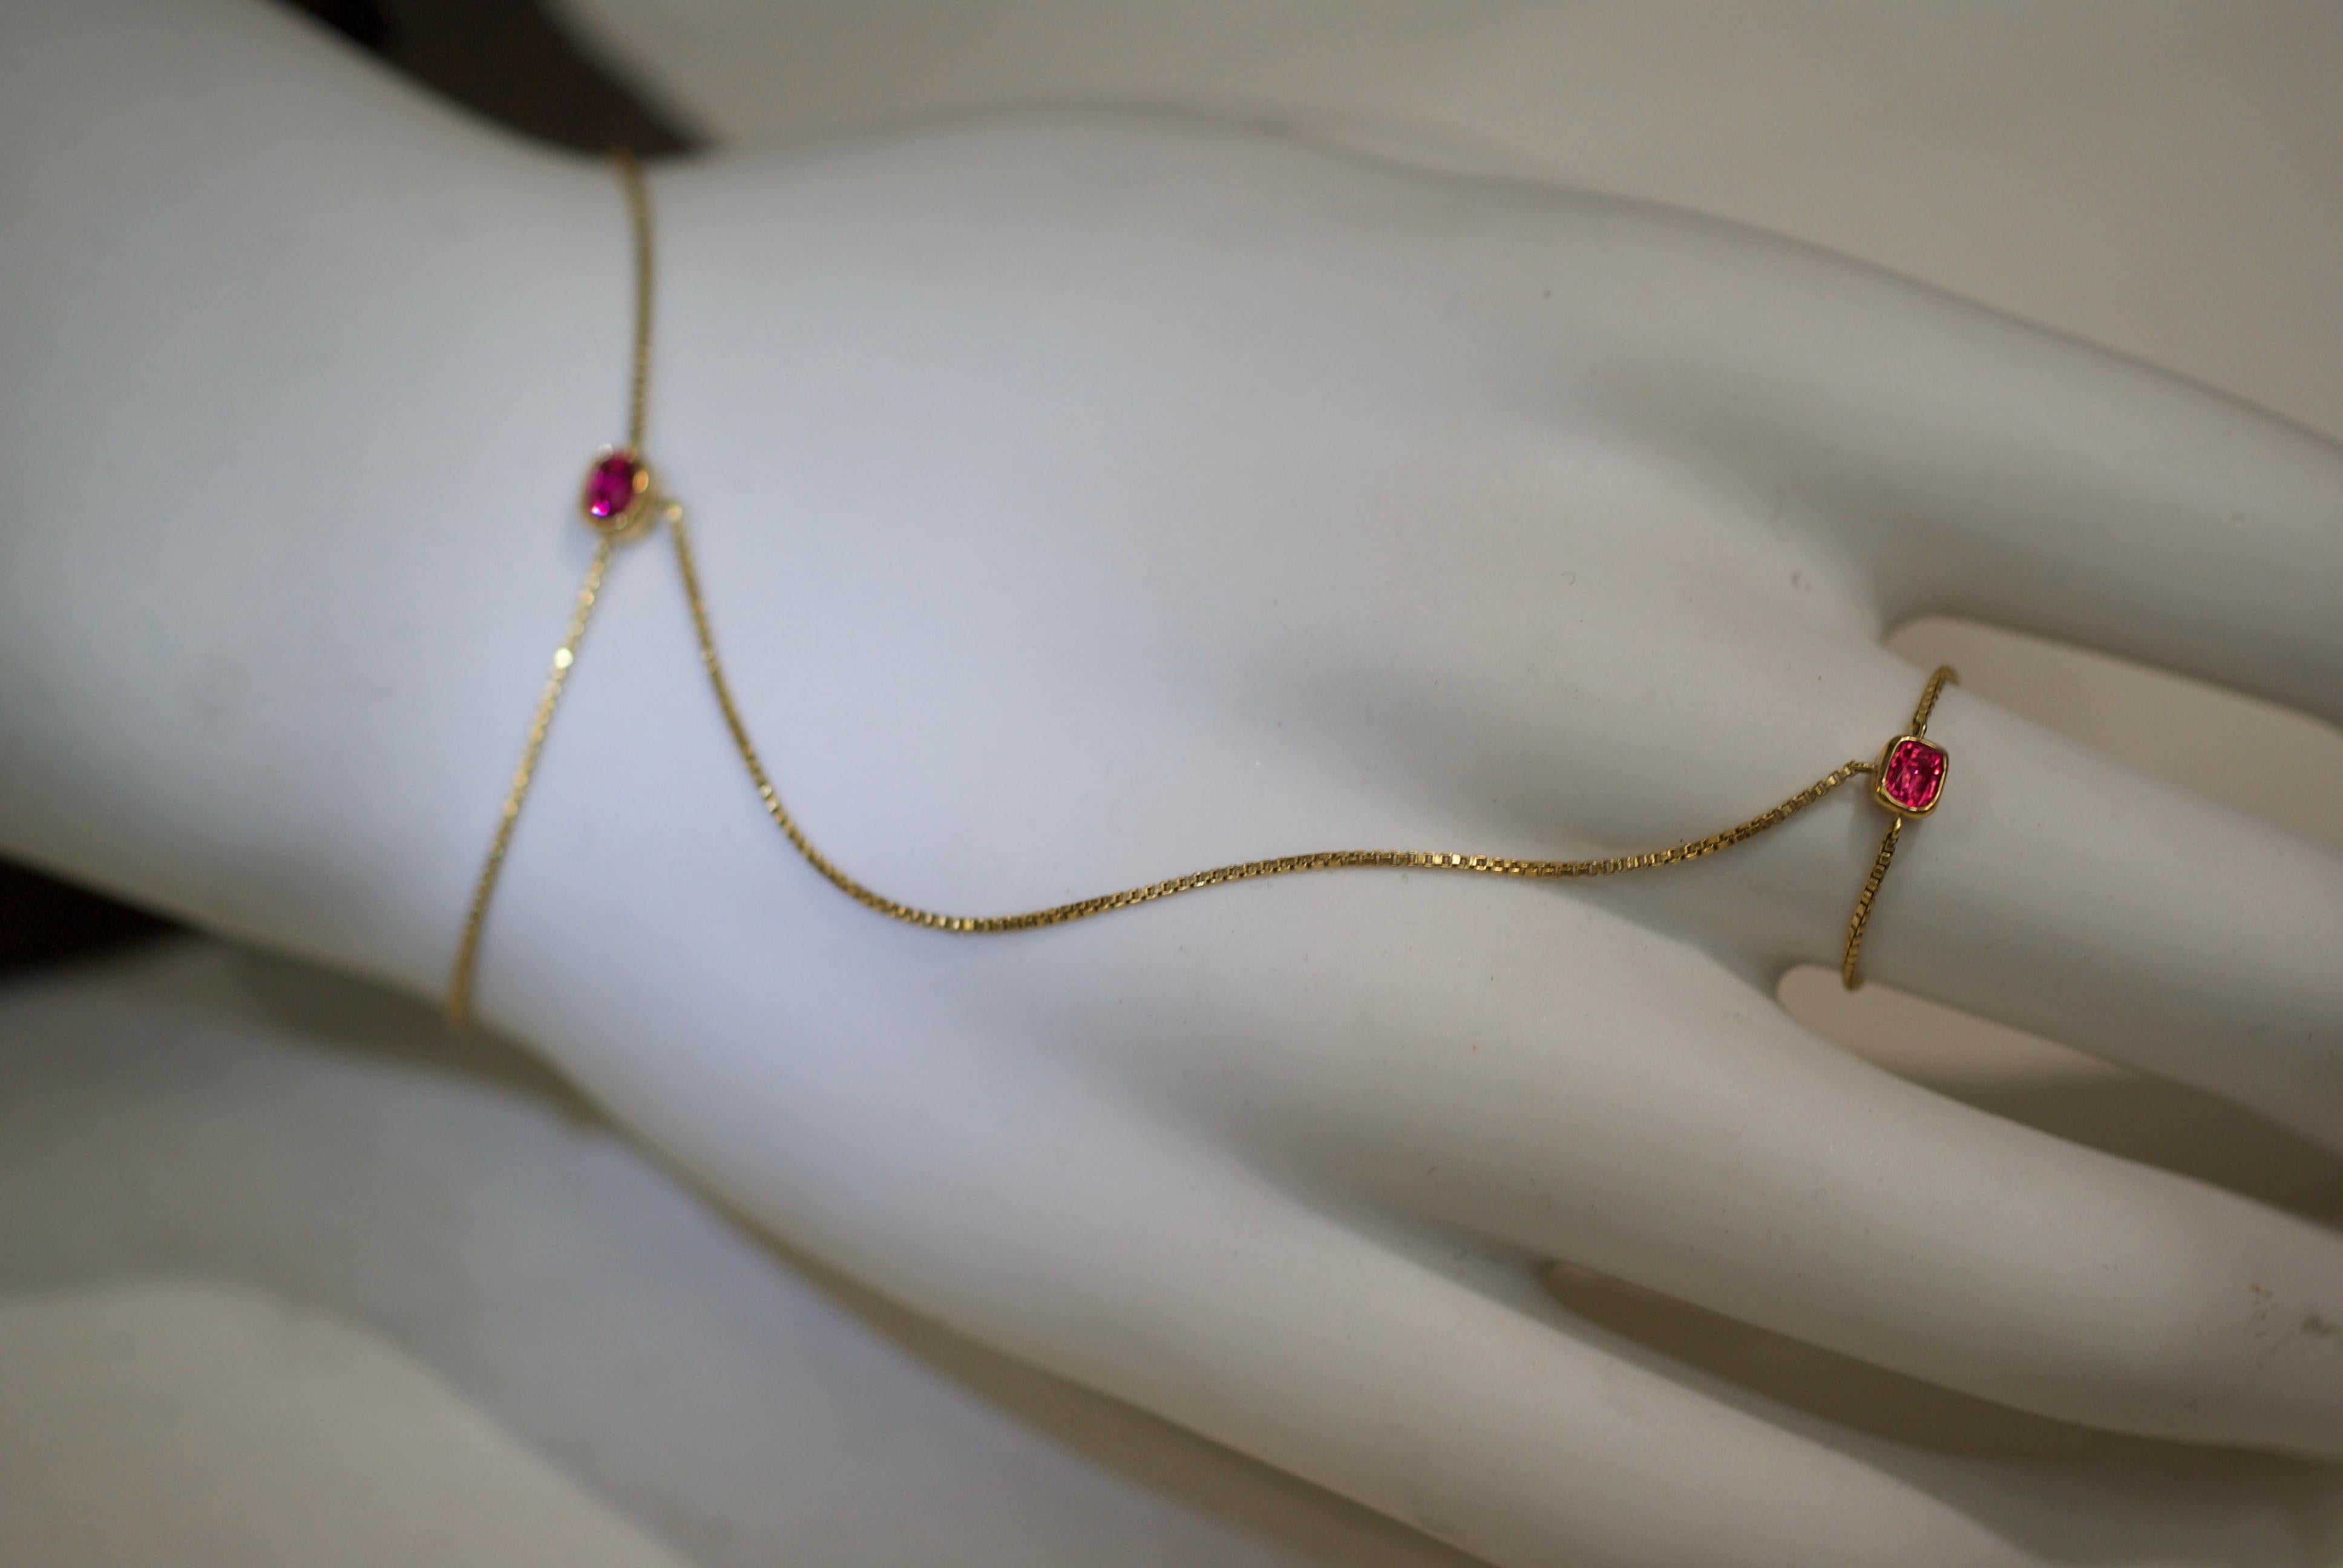 Designed as a pair of cushion-cut neon pink spinel, each within bezels, one centering a bracelet and the other connected by chain to a ring. Sinuous, sensual and elegant. Manufactured entirely in 18K gold. Made in New York City.

One photograph